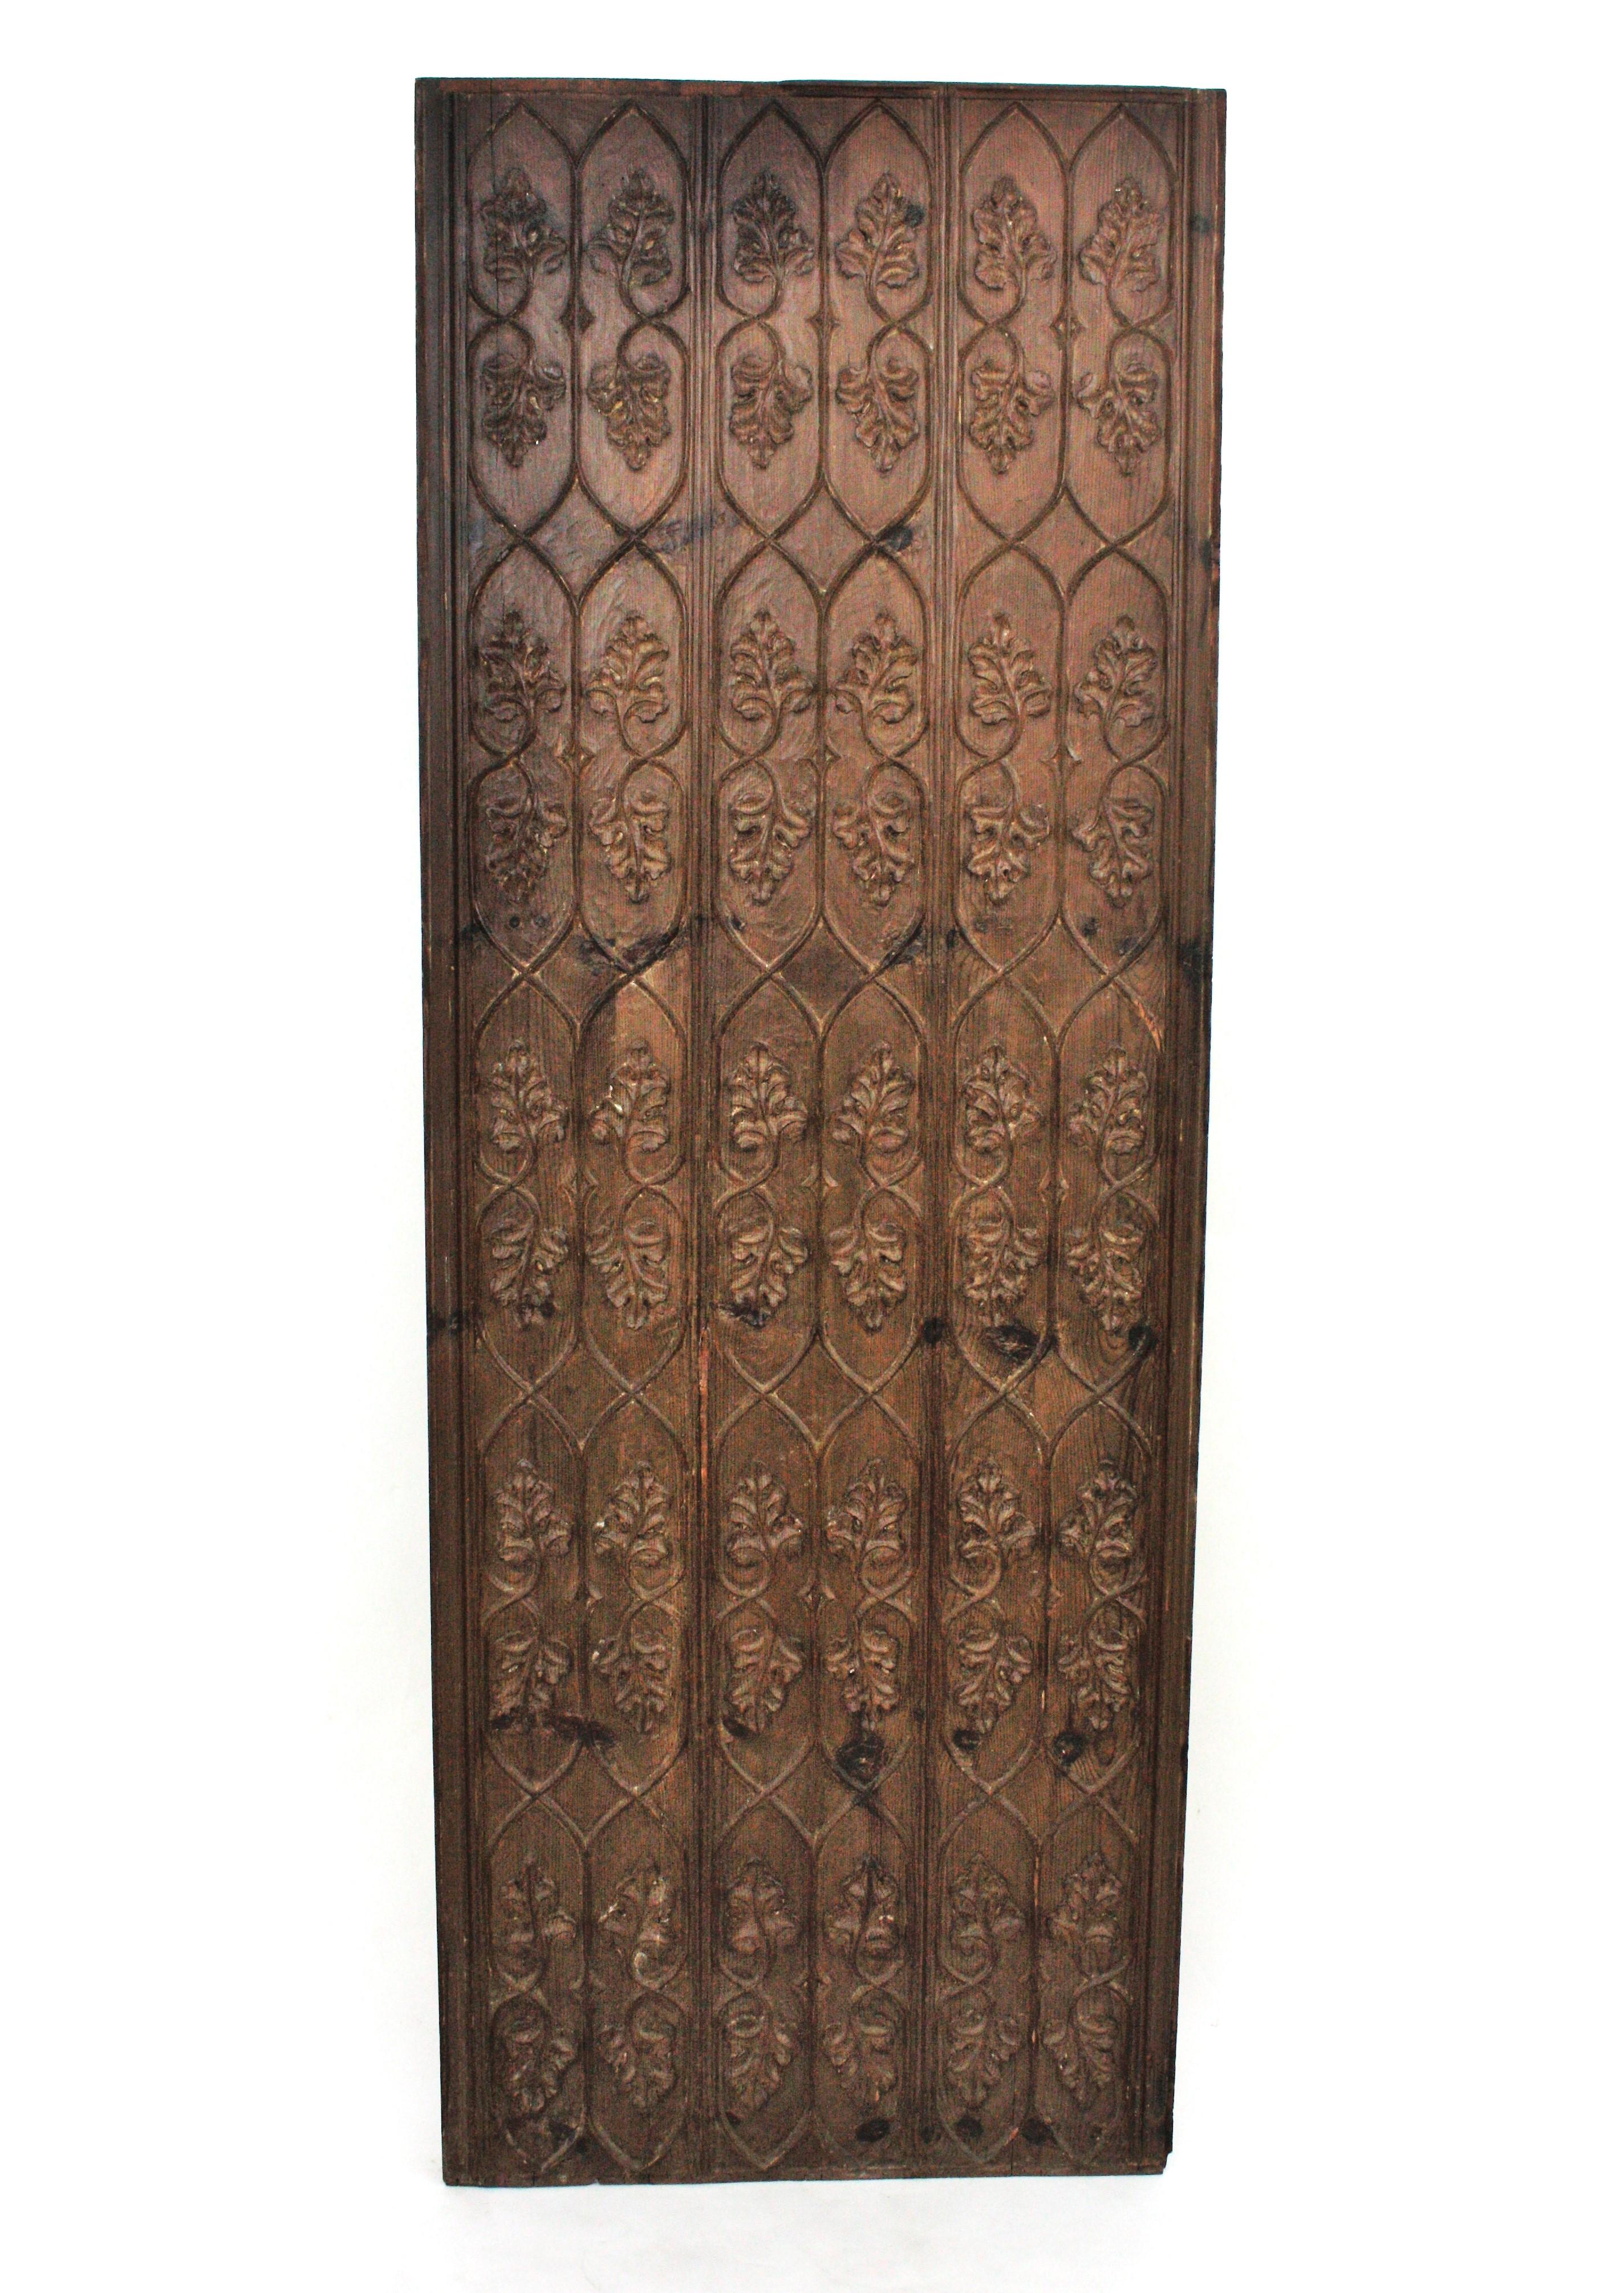 Wall Panel / Headboard in Walnut, Spain, 1940s
This architectural wall panel features beautifully handcarved foliage details thorough. 
To be used as wall decoration or headboard.
Terrific aged patina. 
Wear commensurate with age, stains showing